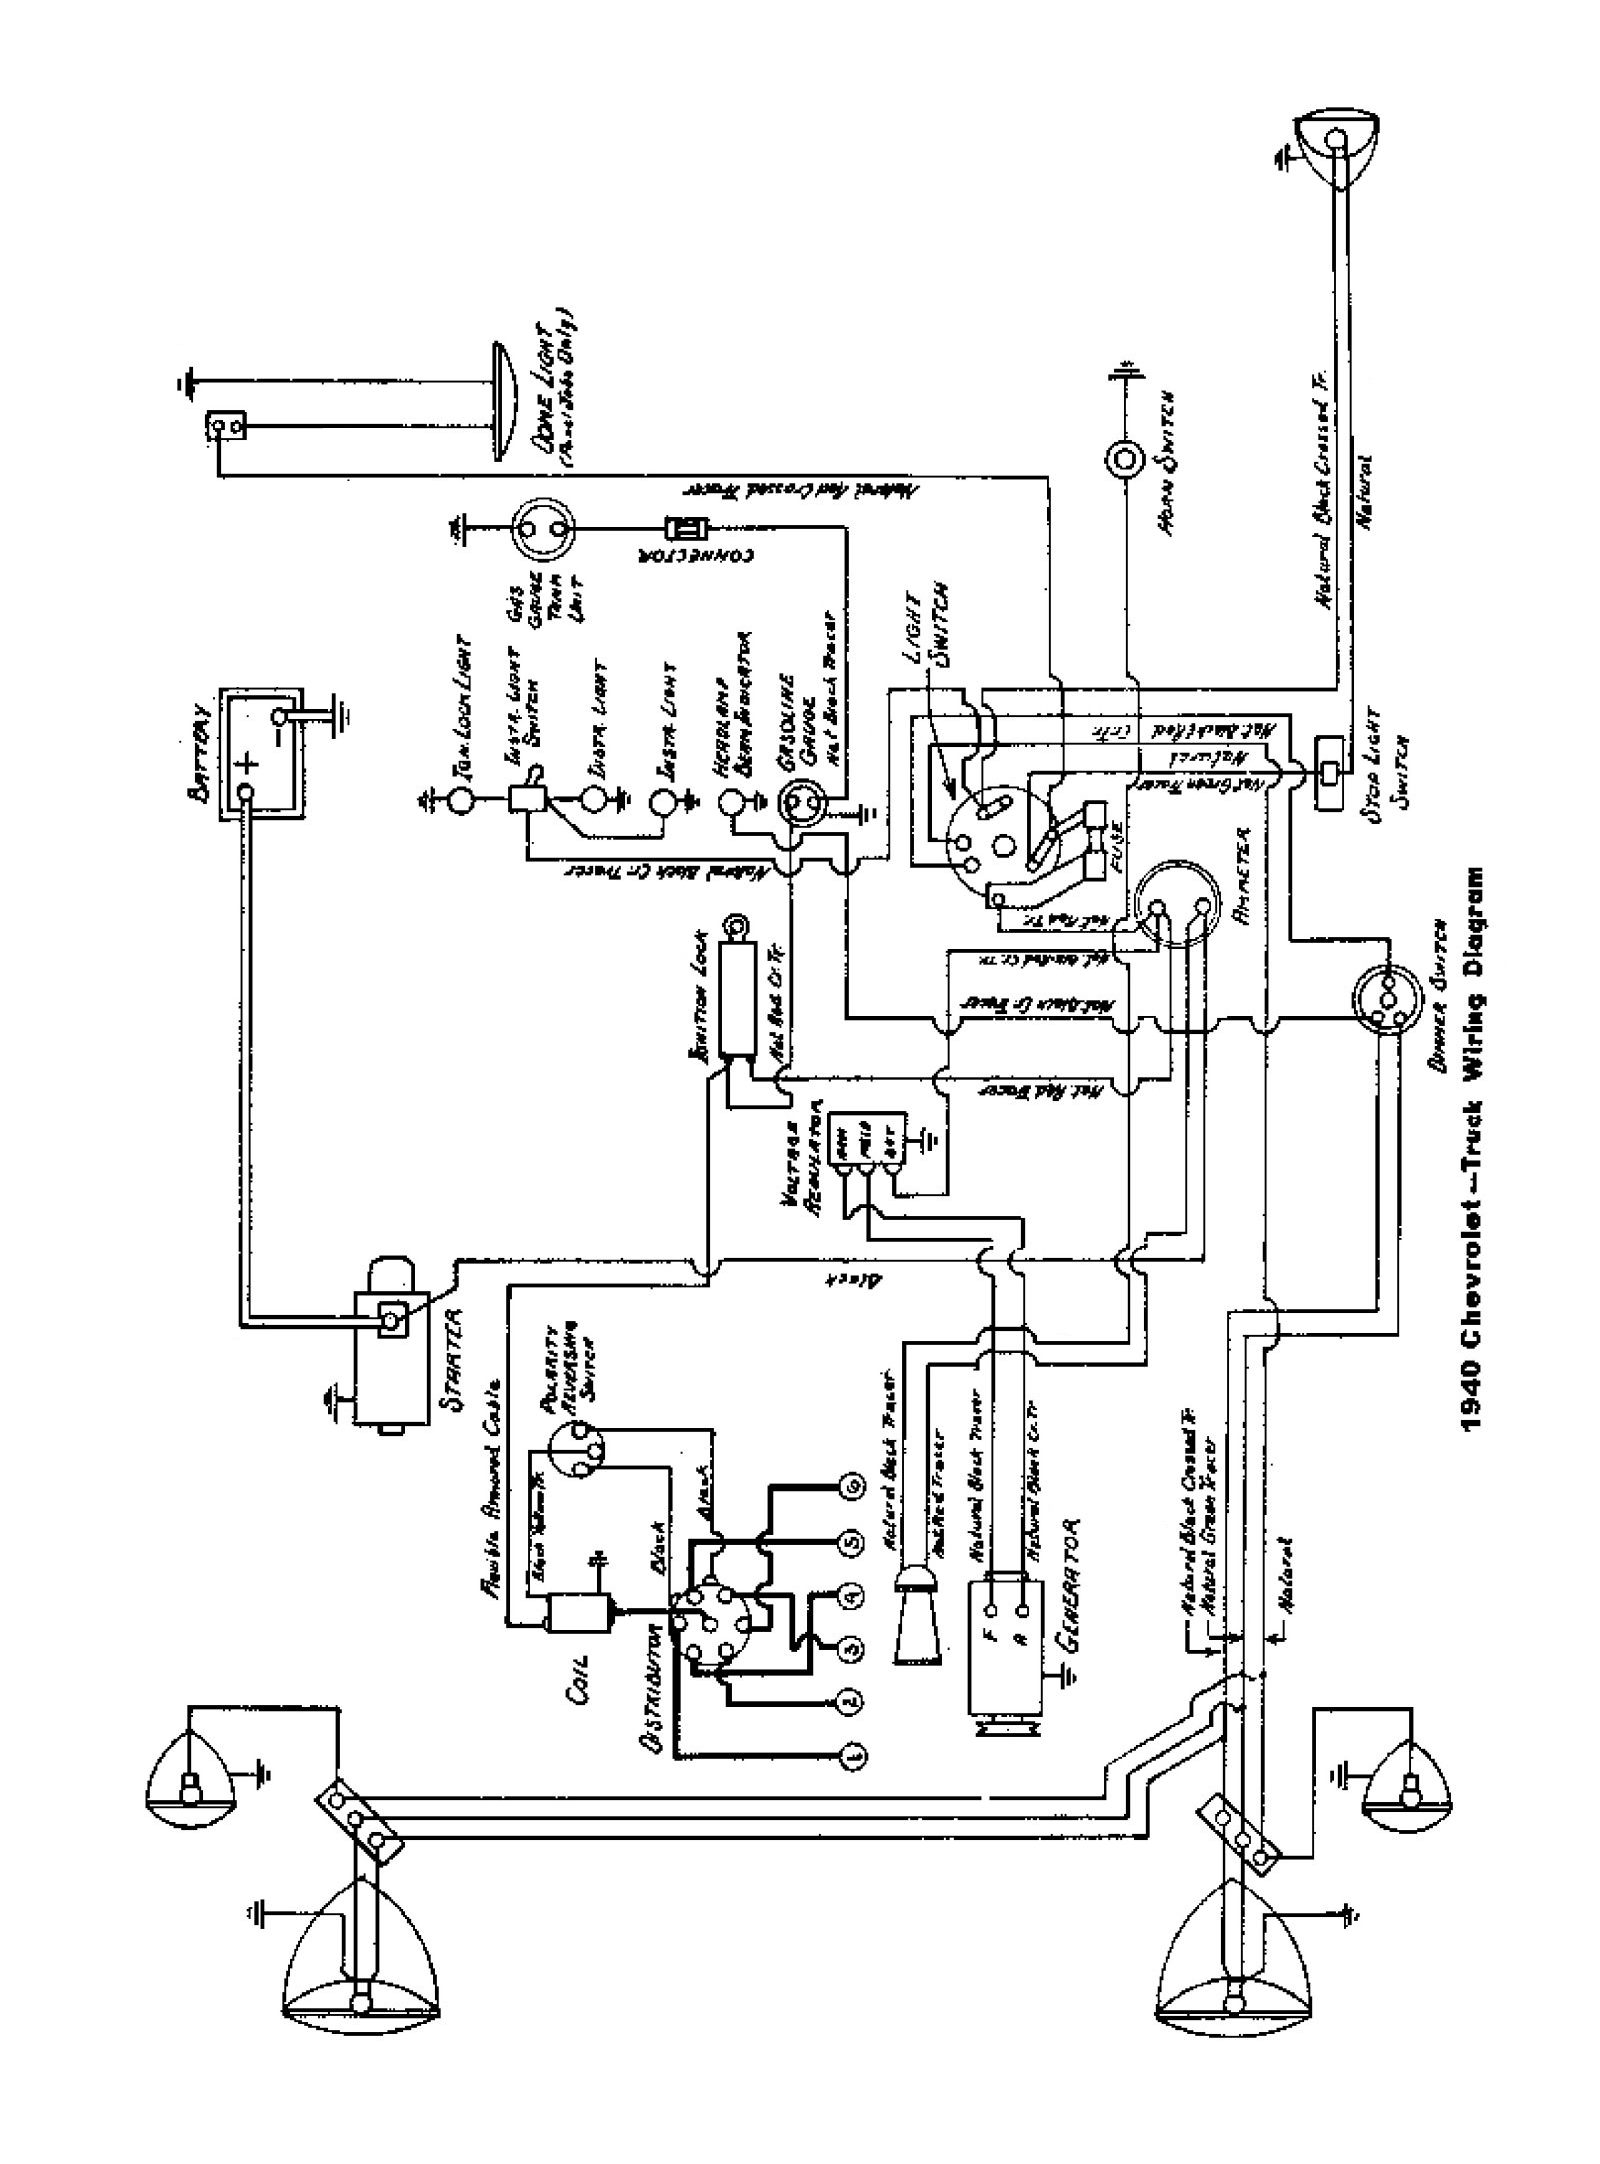 1949 Chevrolet Headlight Dimmer Switch Wiring Diagram from chevy.oldcarmanualproject.com